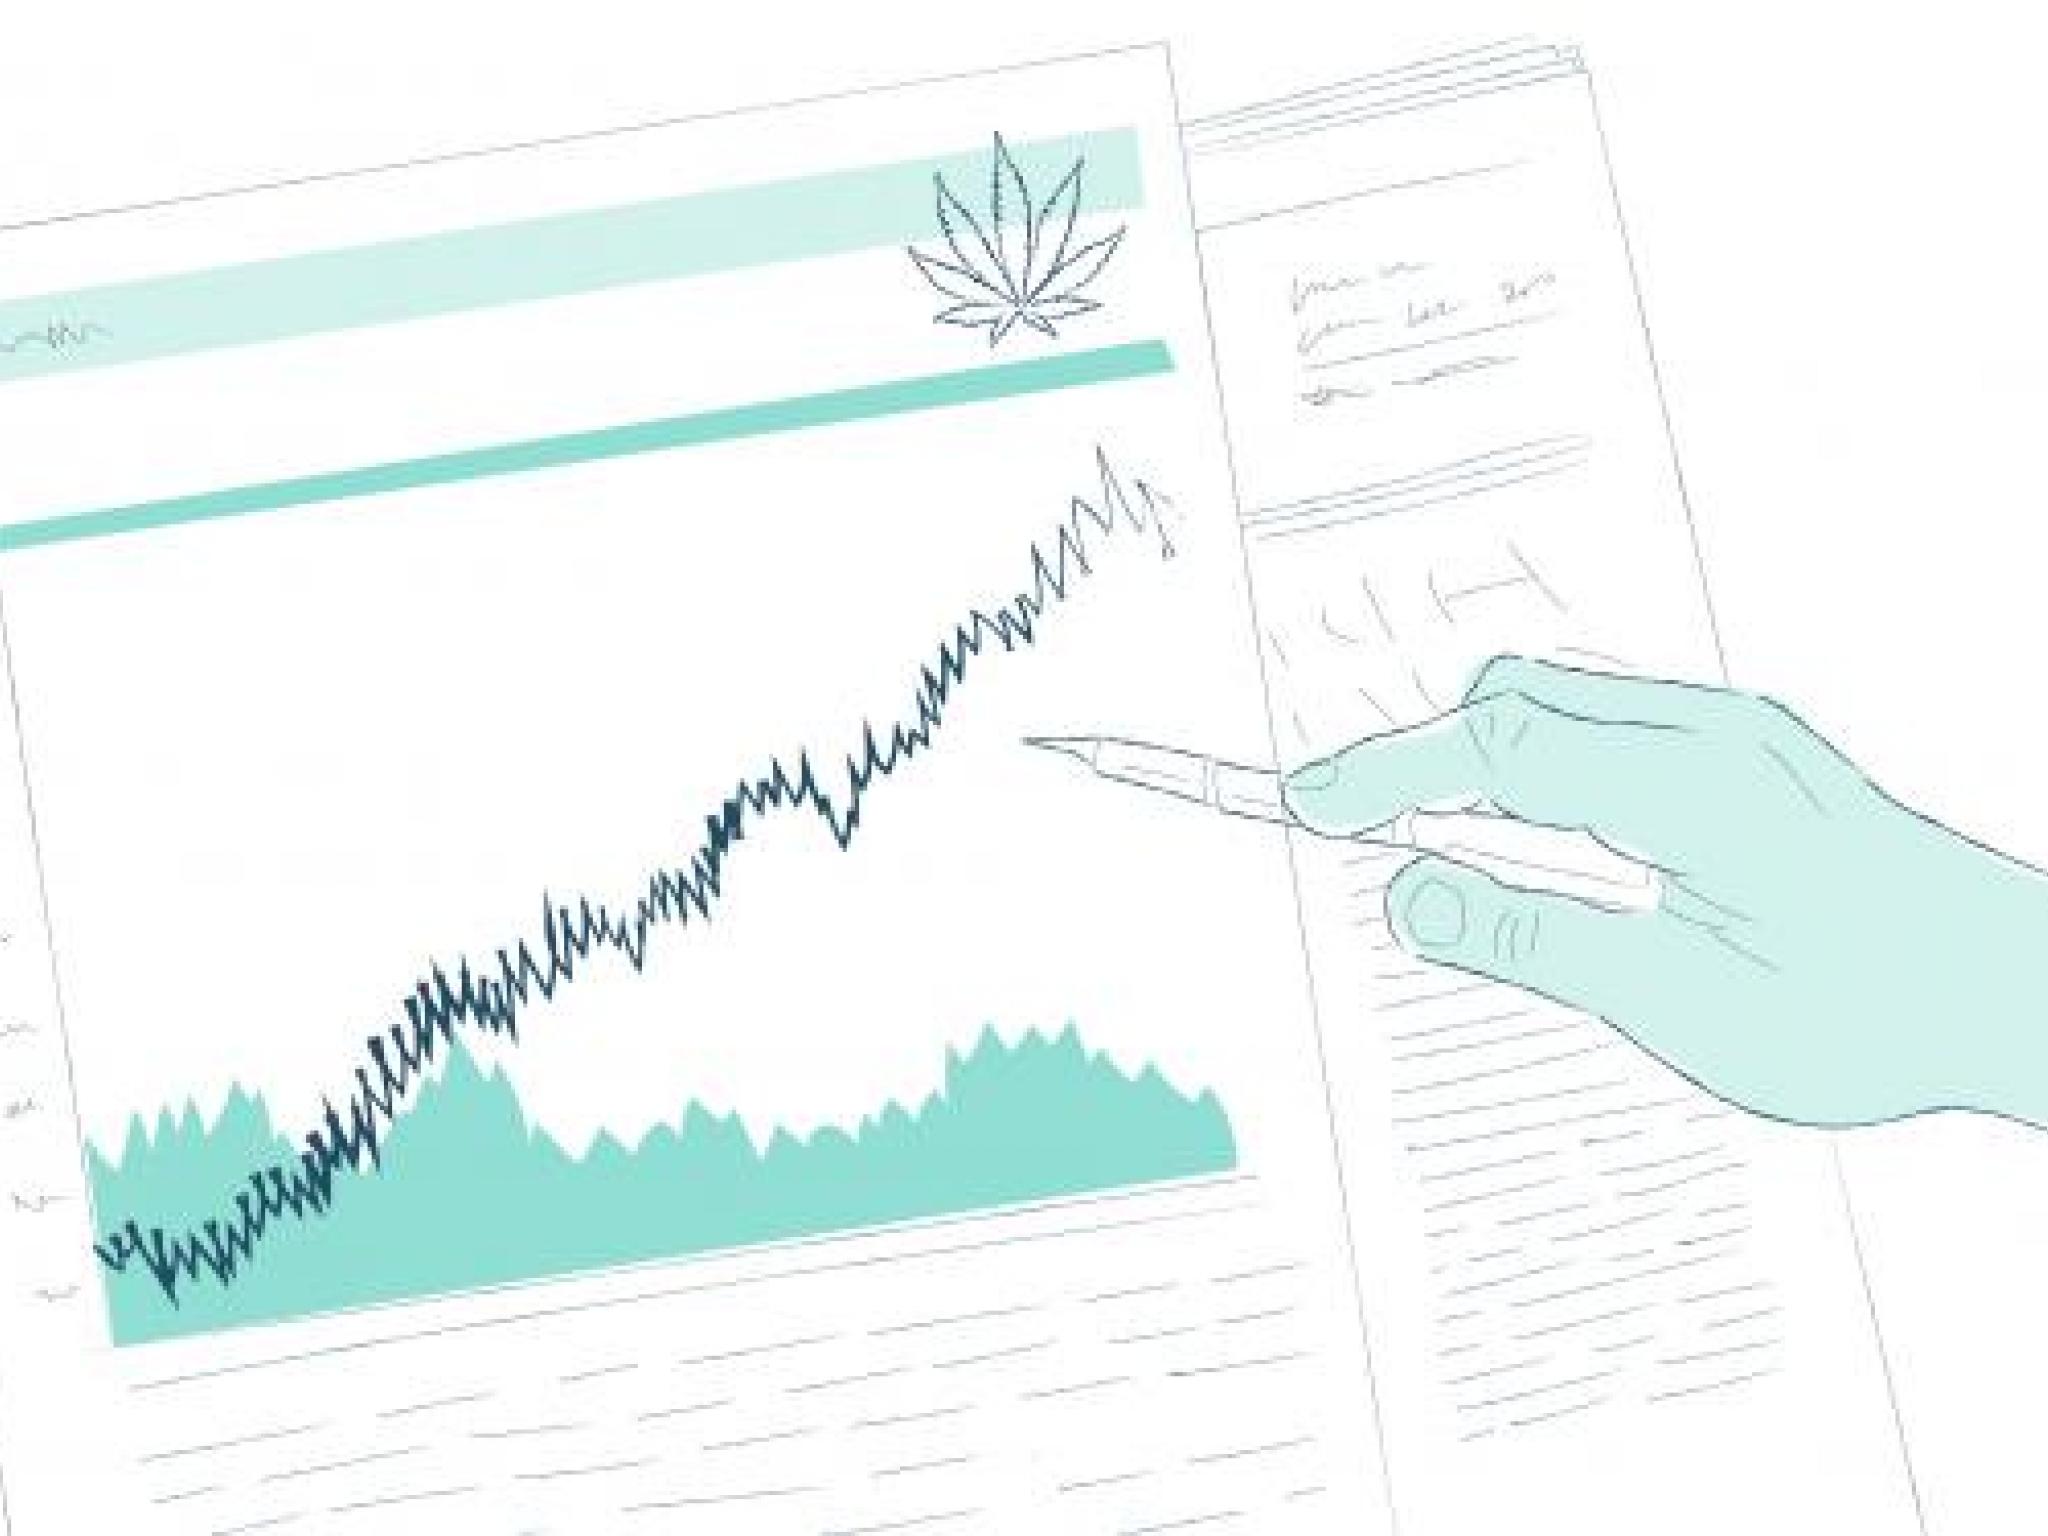  cannabis-stock-gainers-and-losers-from-may-14-2021 